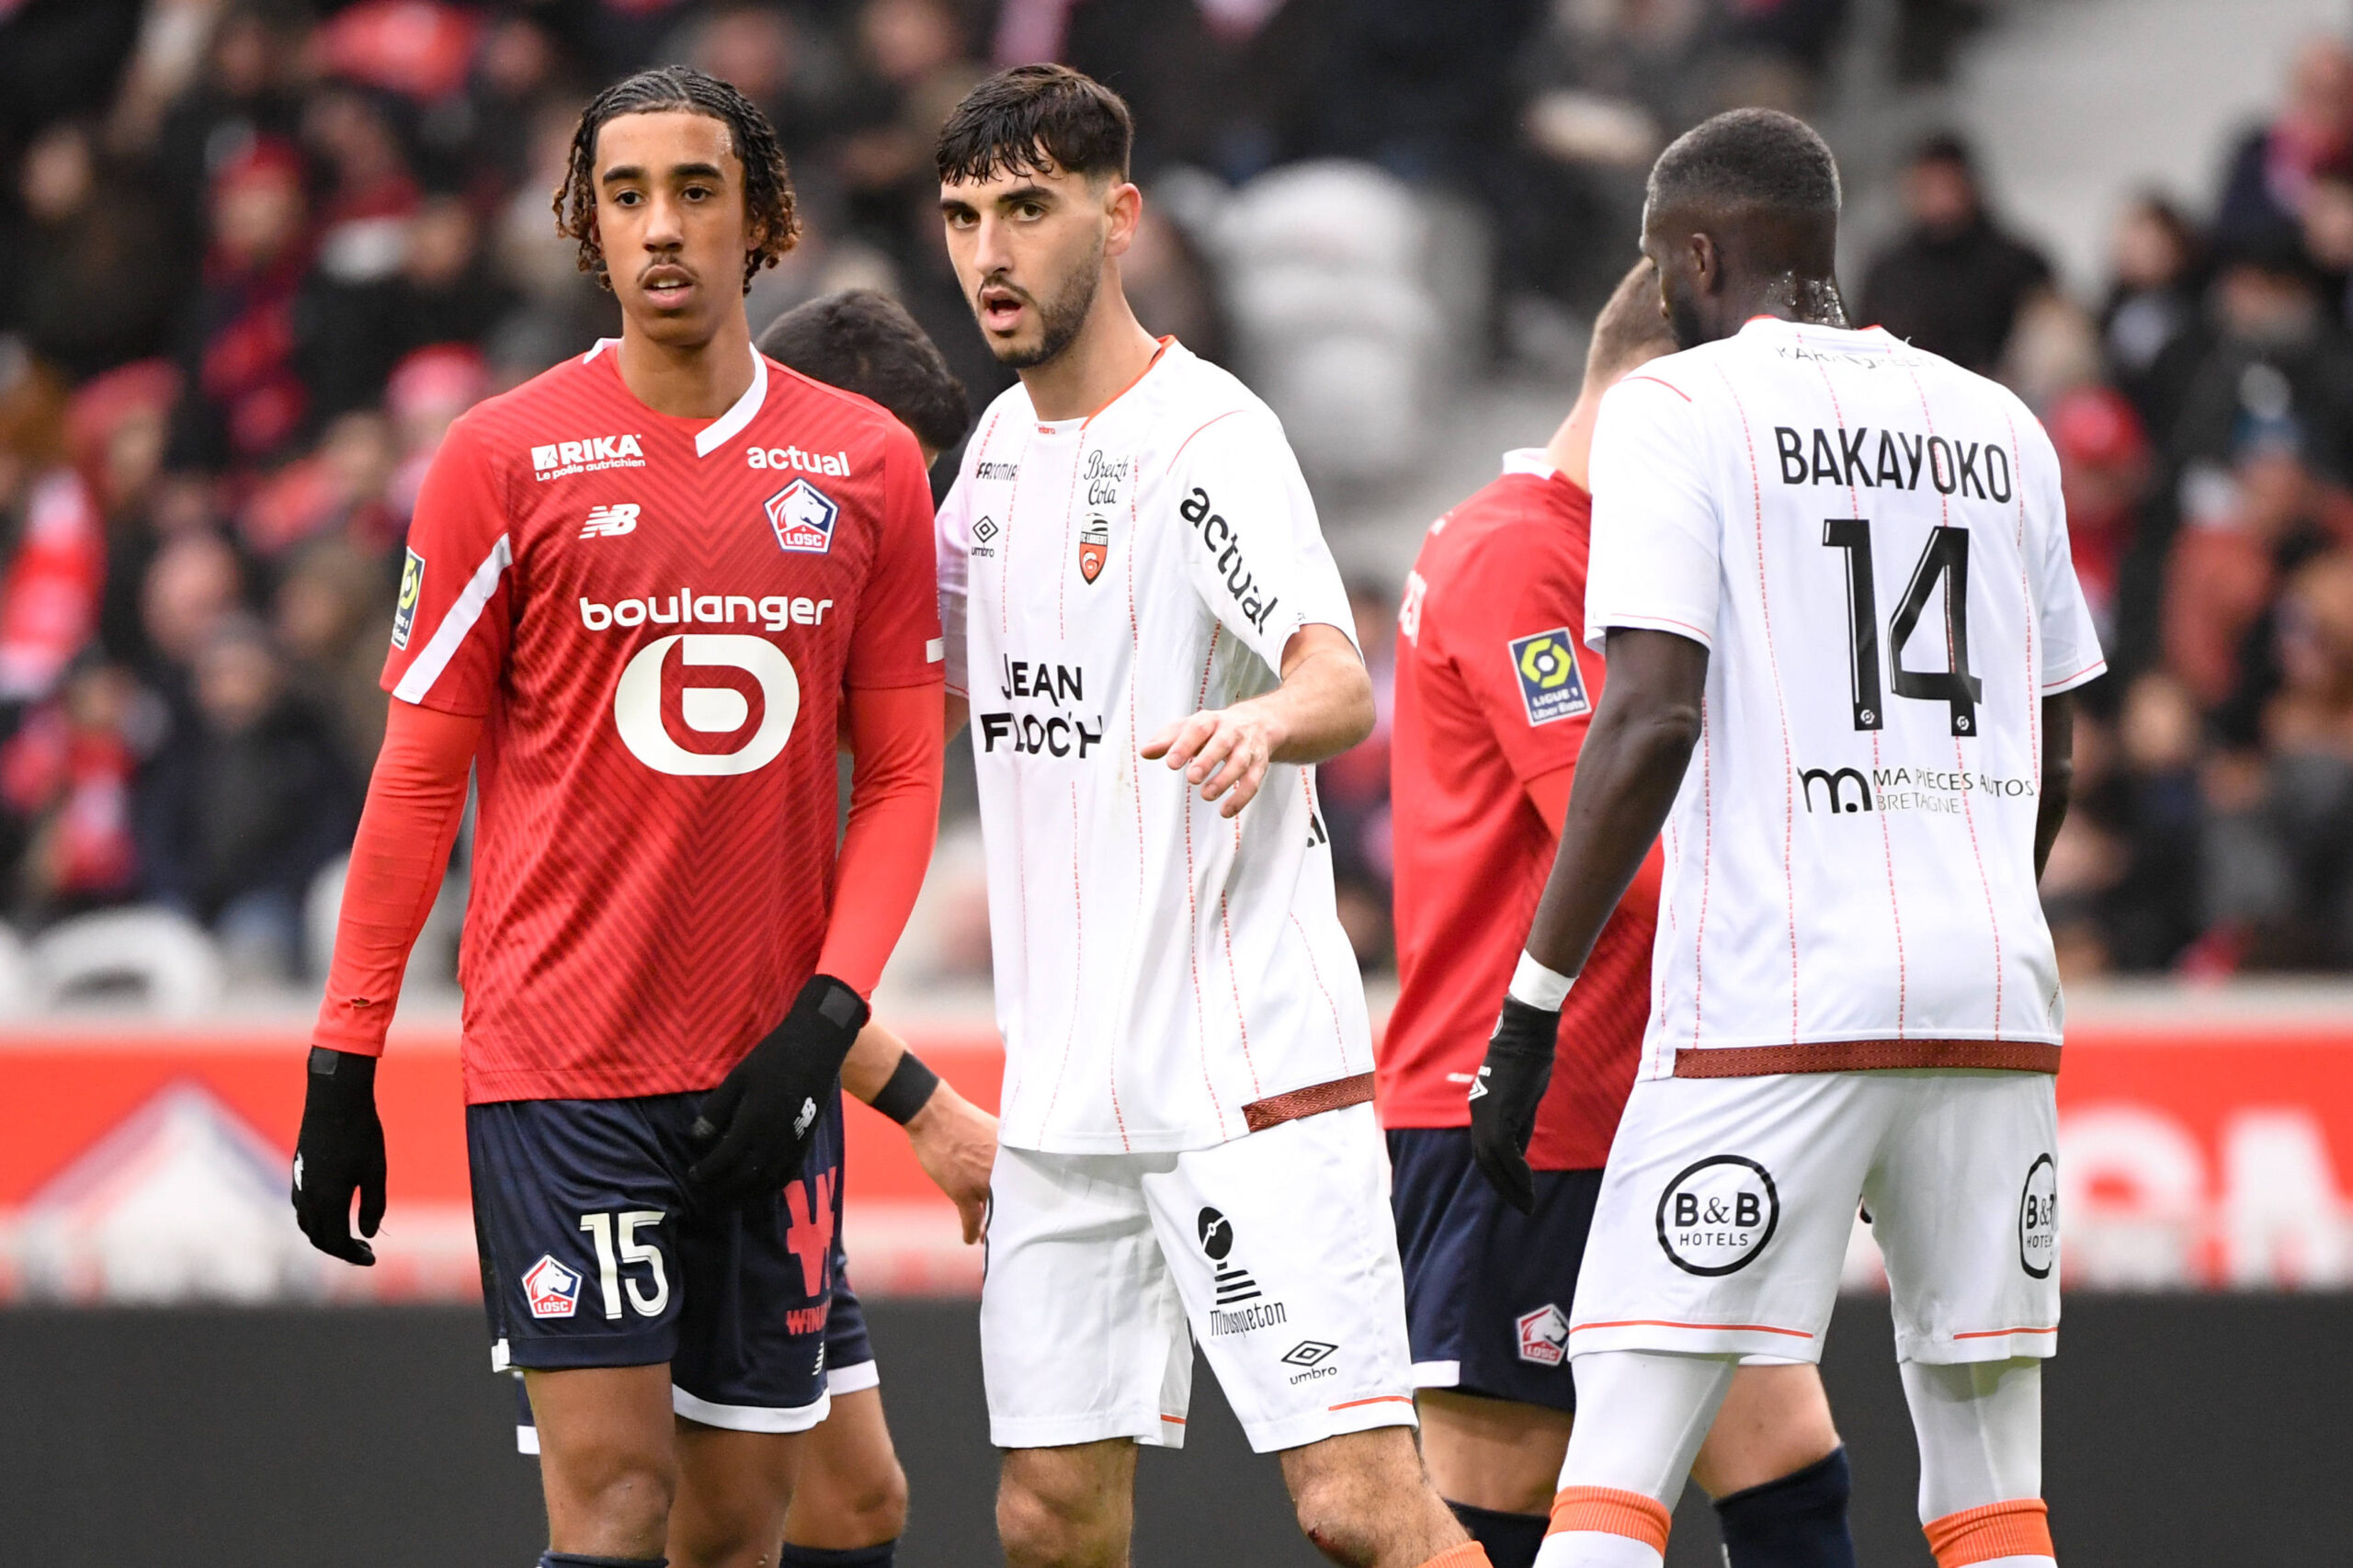 LOSC Lille defender Leny Yoro being marked by FC Lorient's Aurlien Pelon in a cruical Ligue 1 matchup